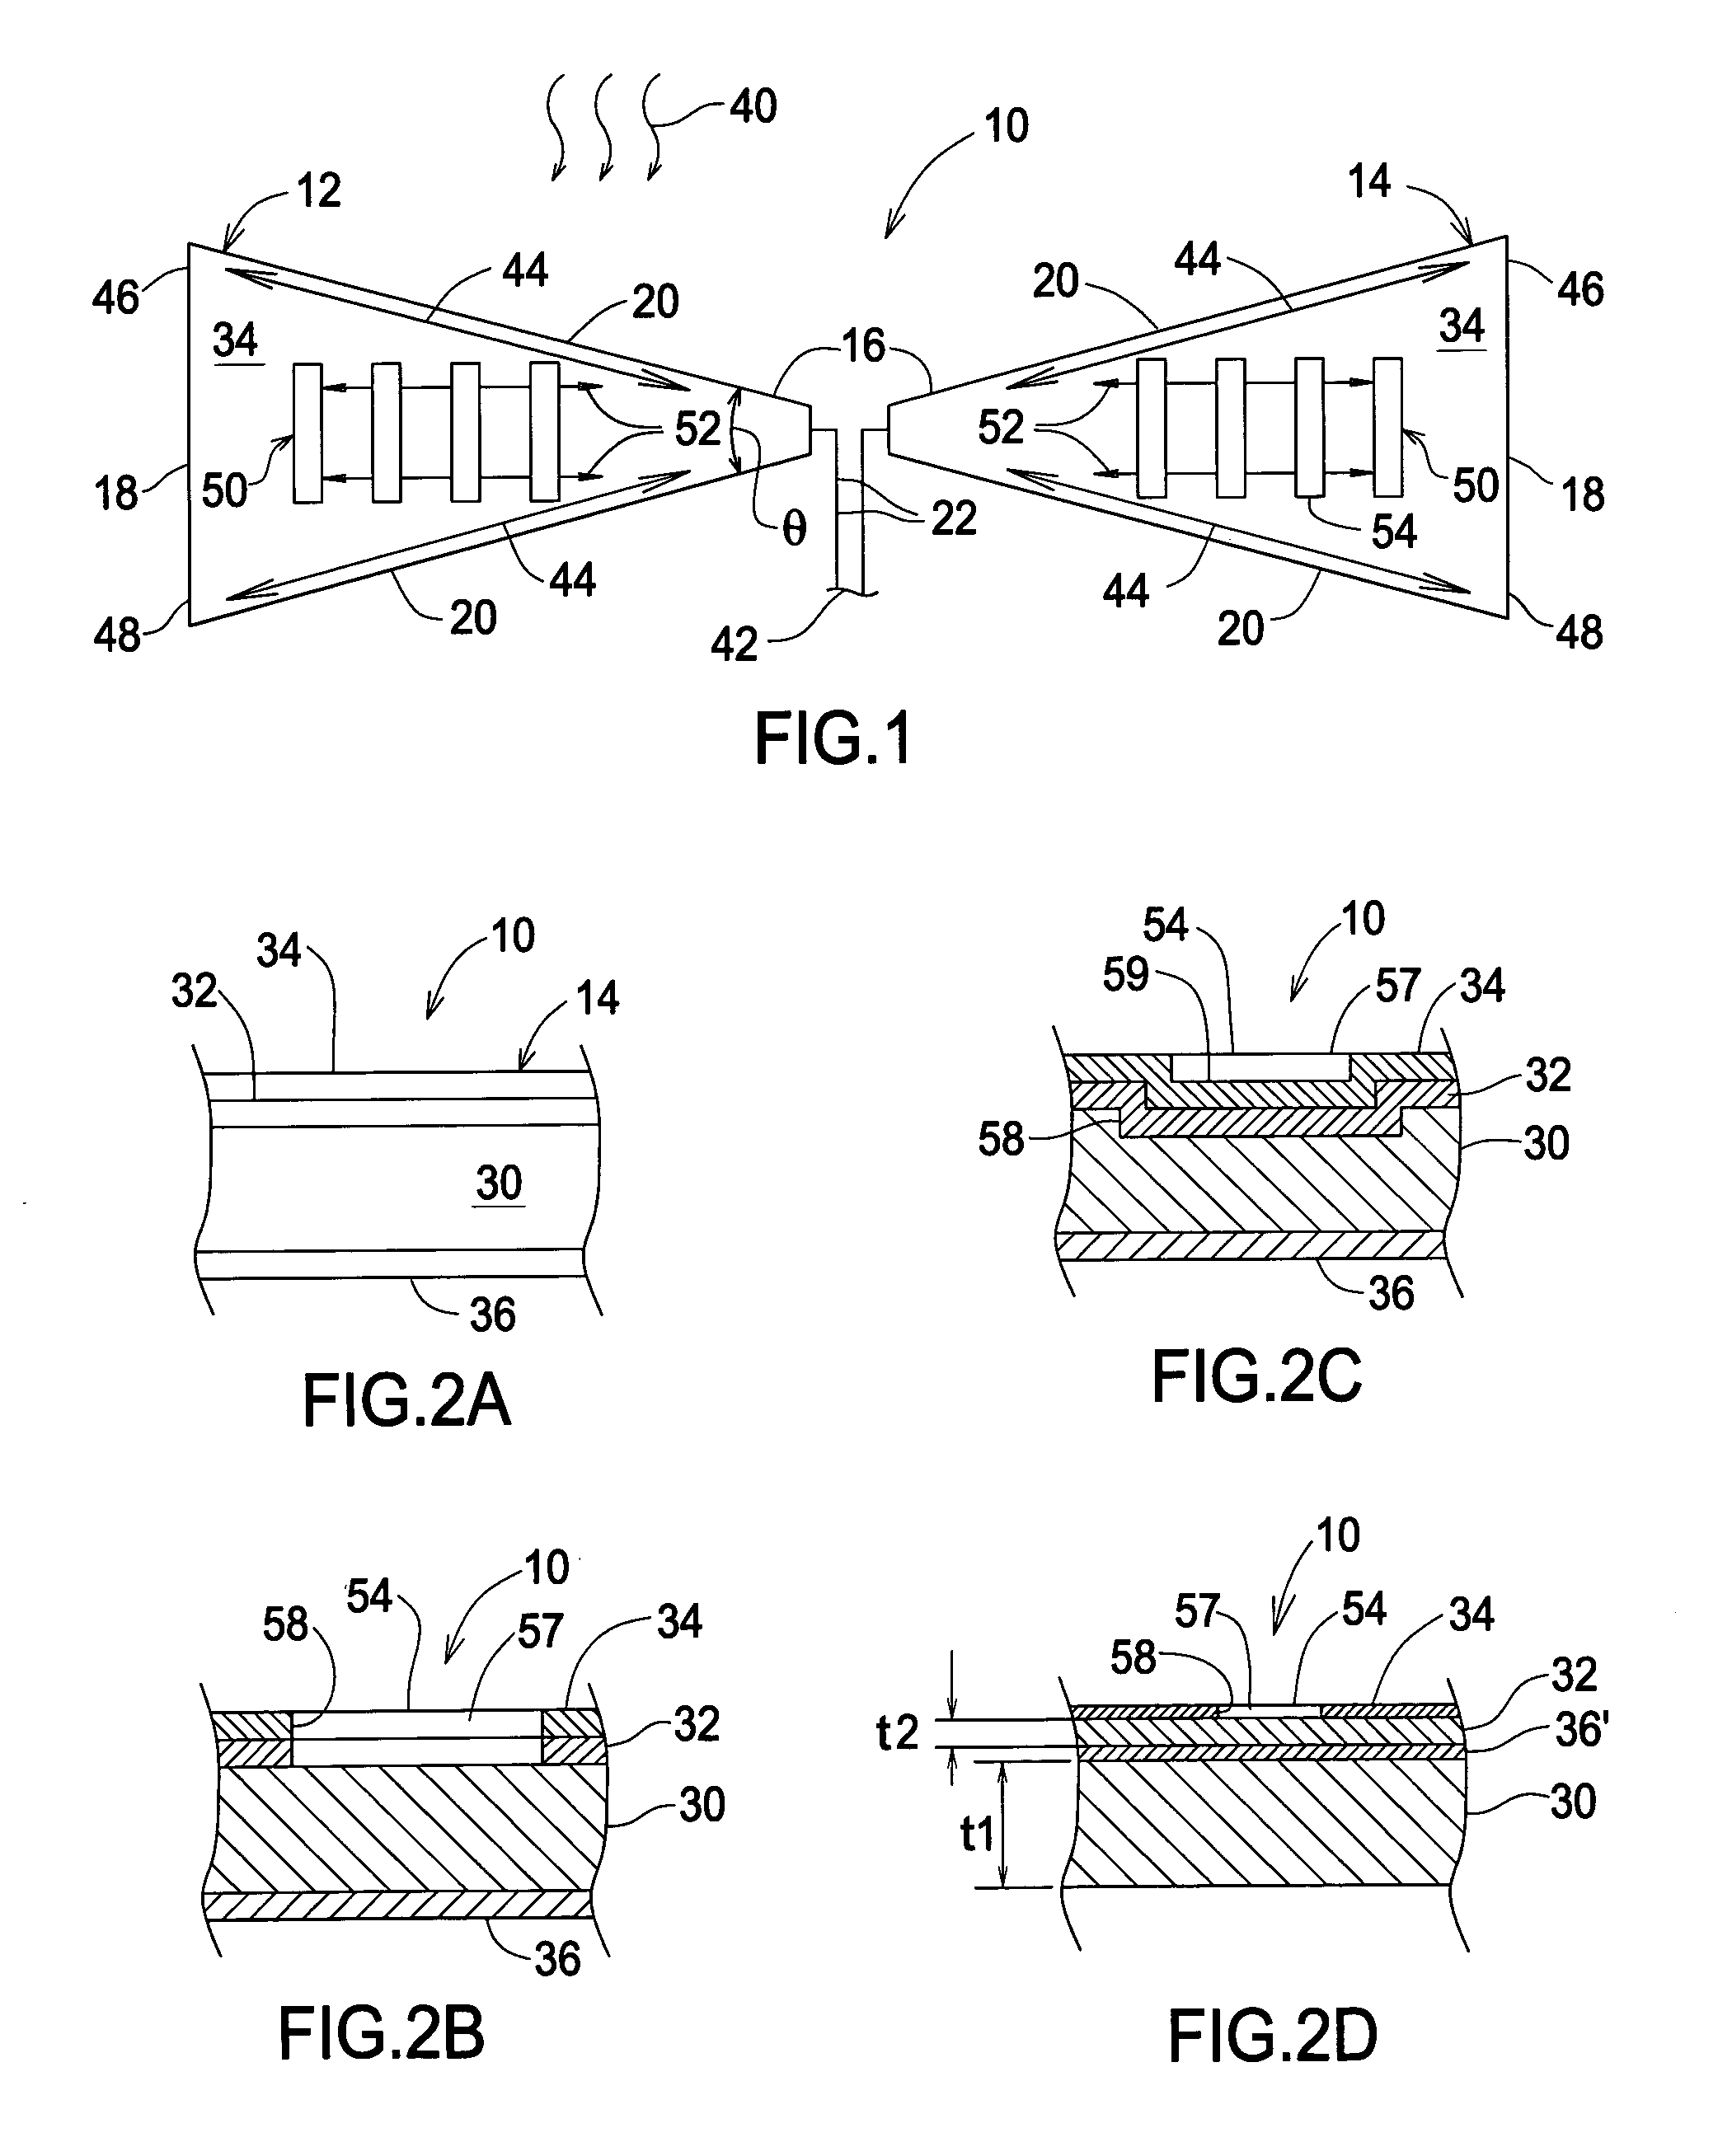 Planar antenna with supplemental antenna current configuration arranged between dominant current paths